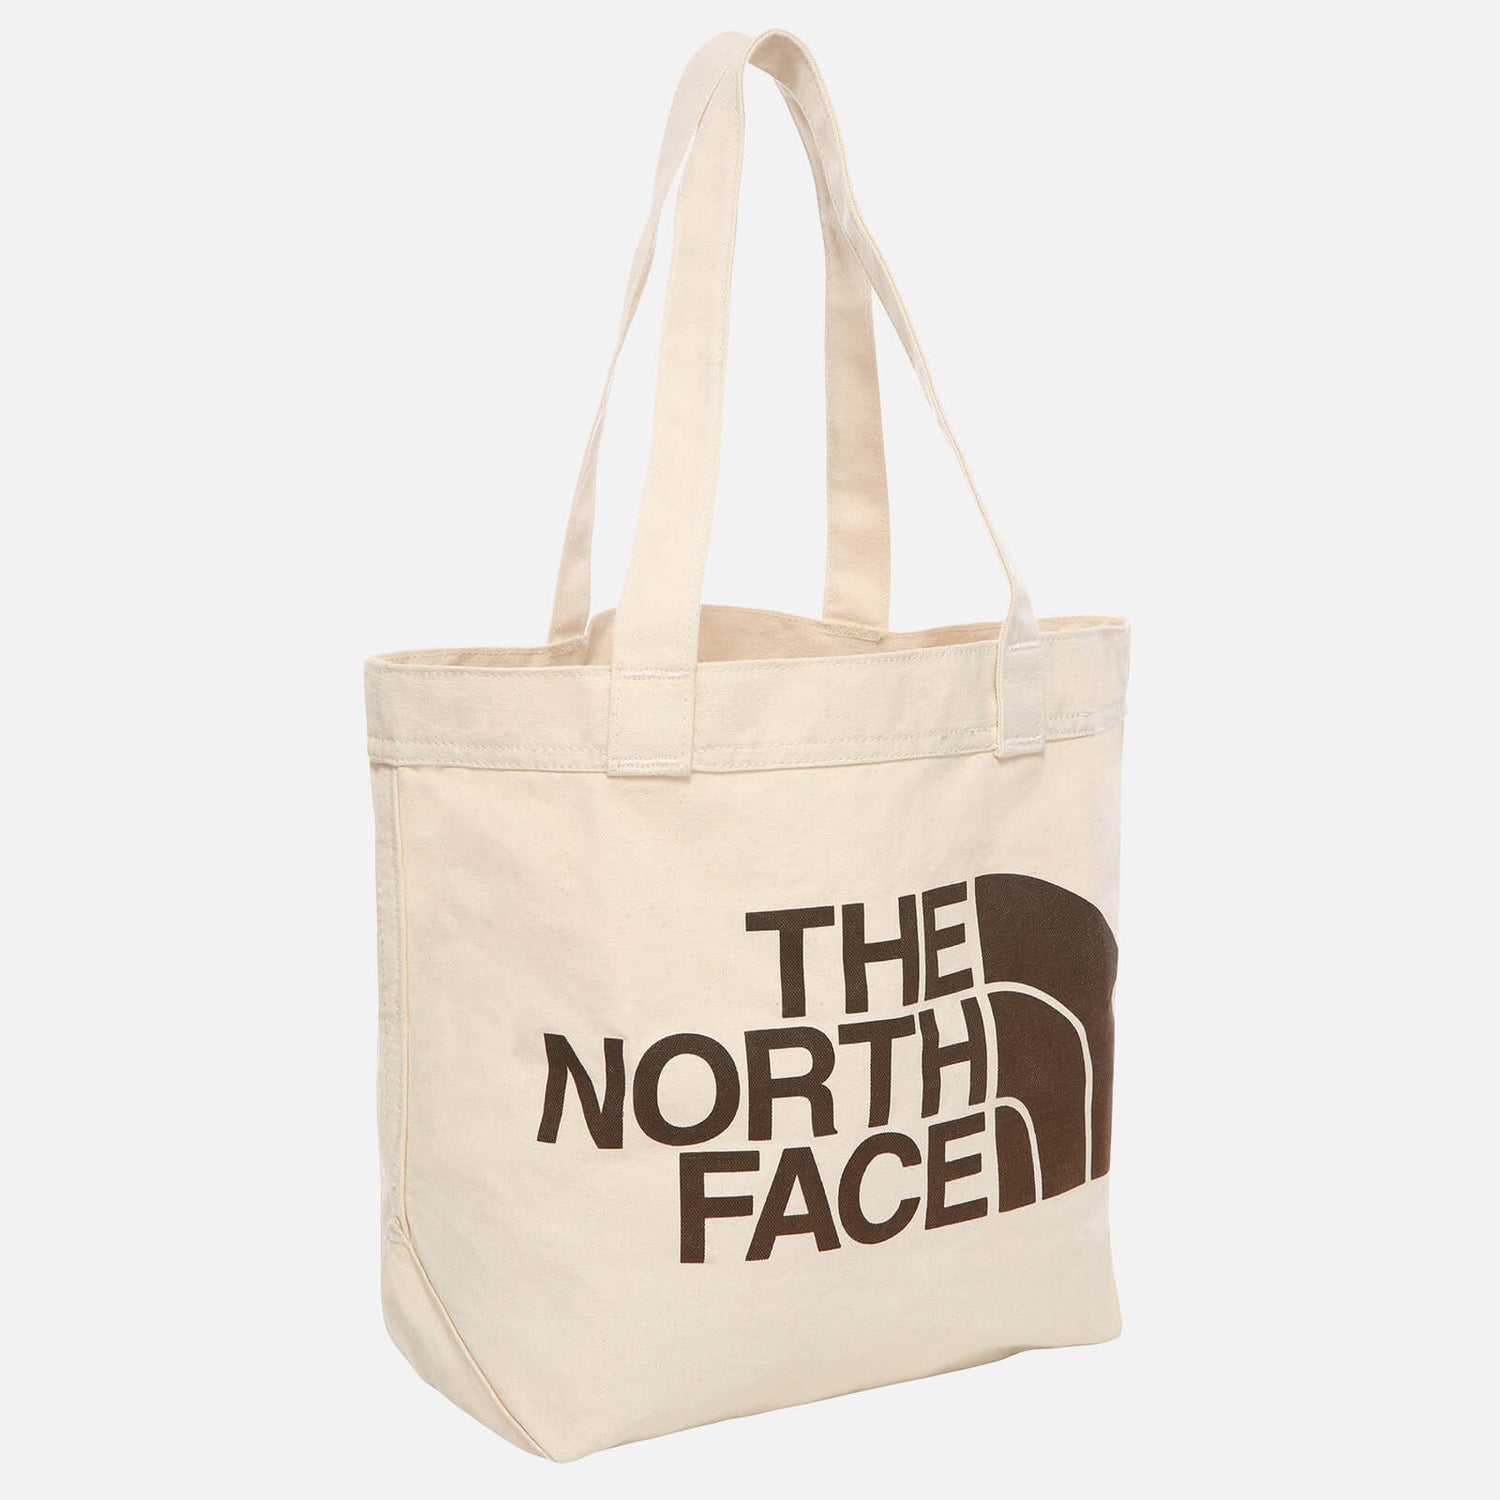 The North Face Basic Cotton Tote Bag - White/Brown